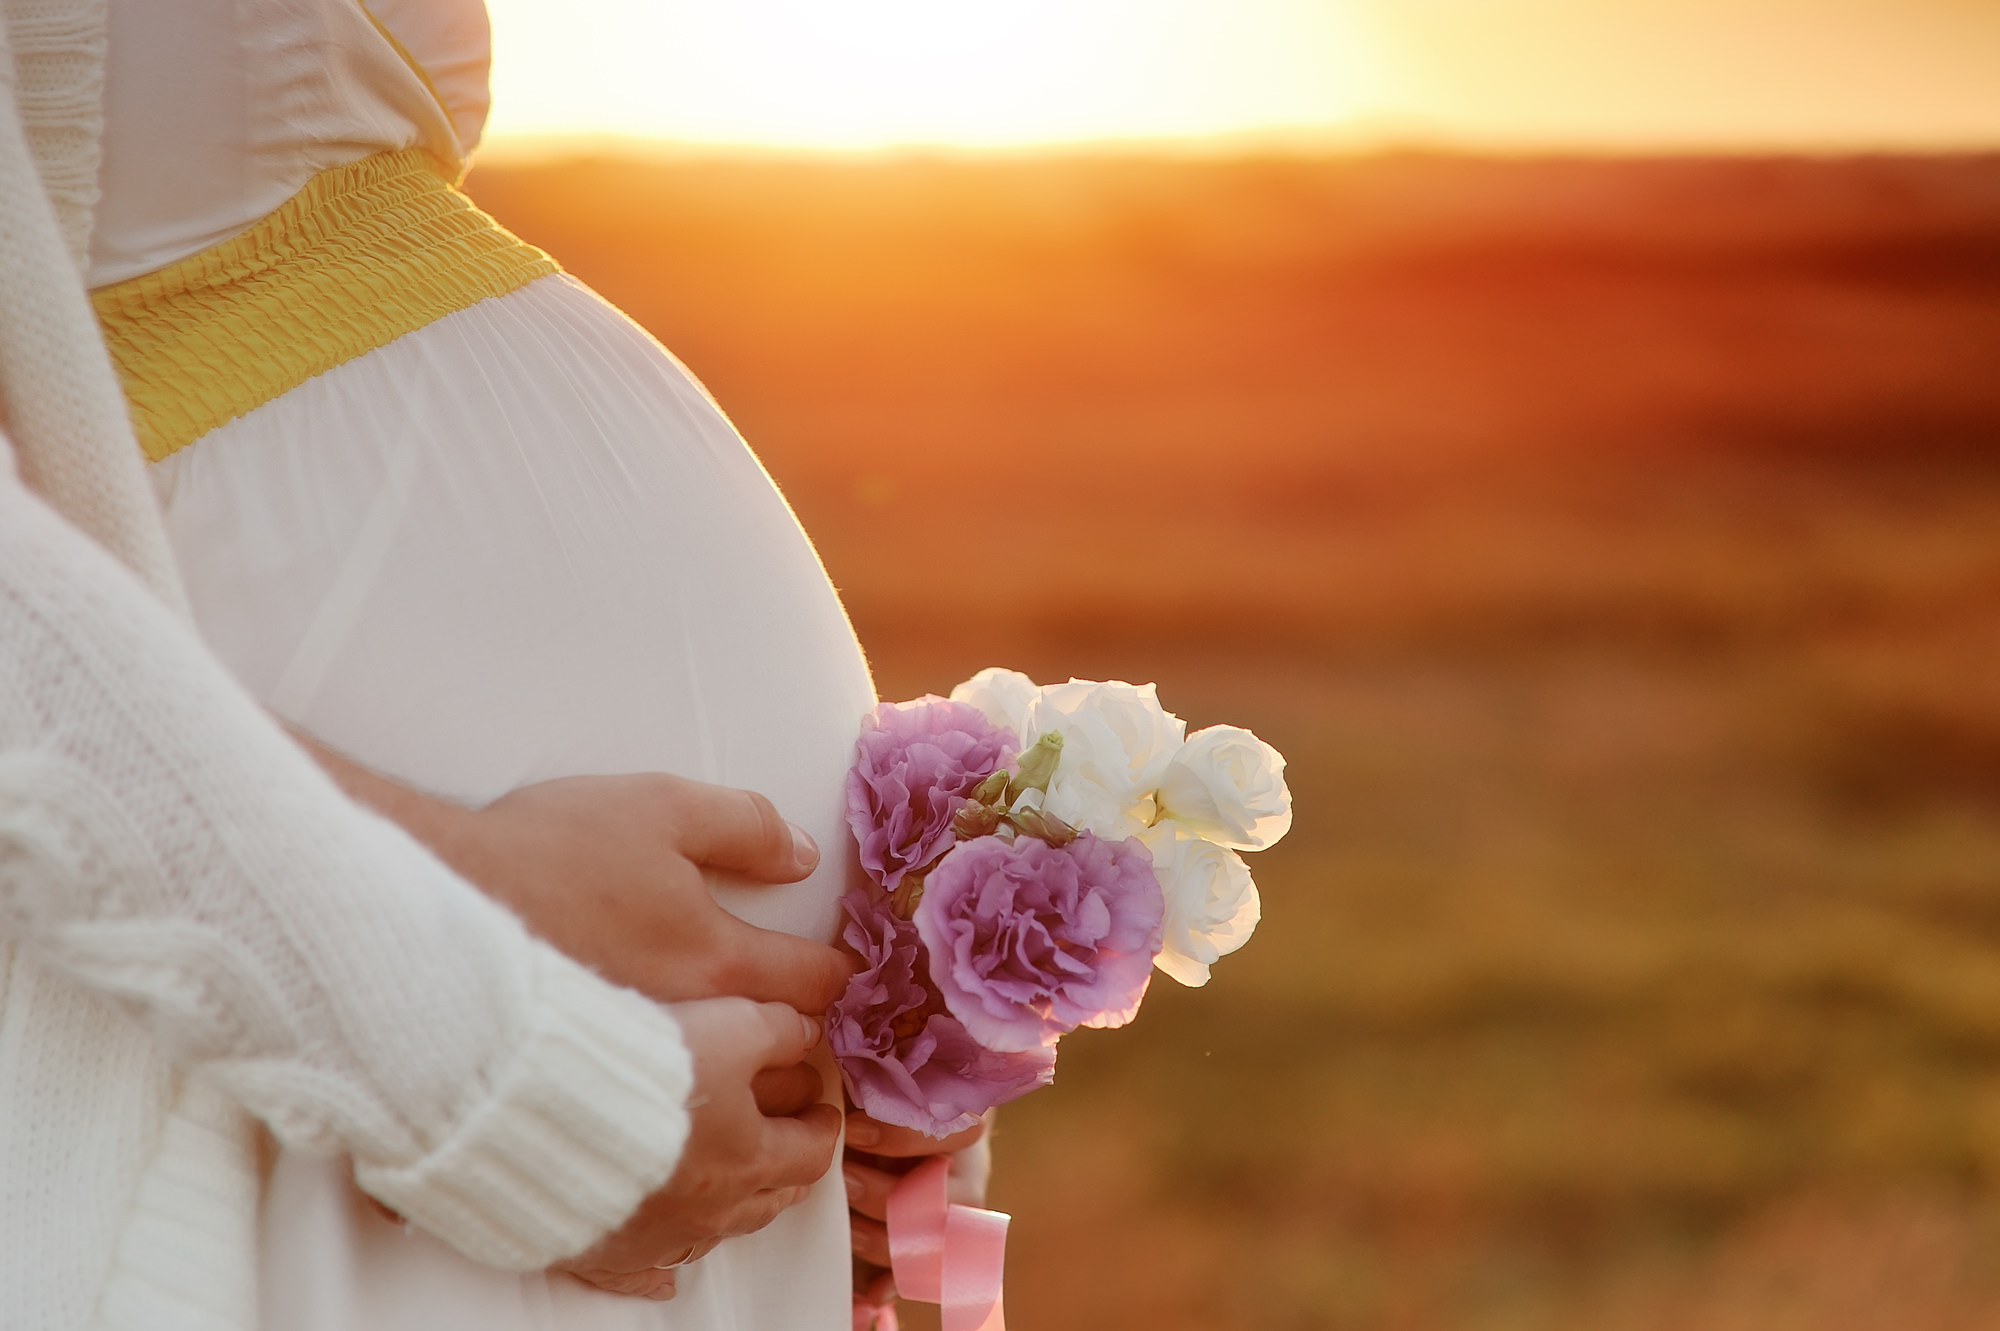 Can you get life insurance while pregnant?